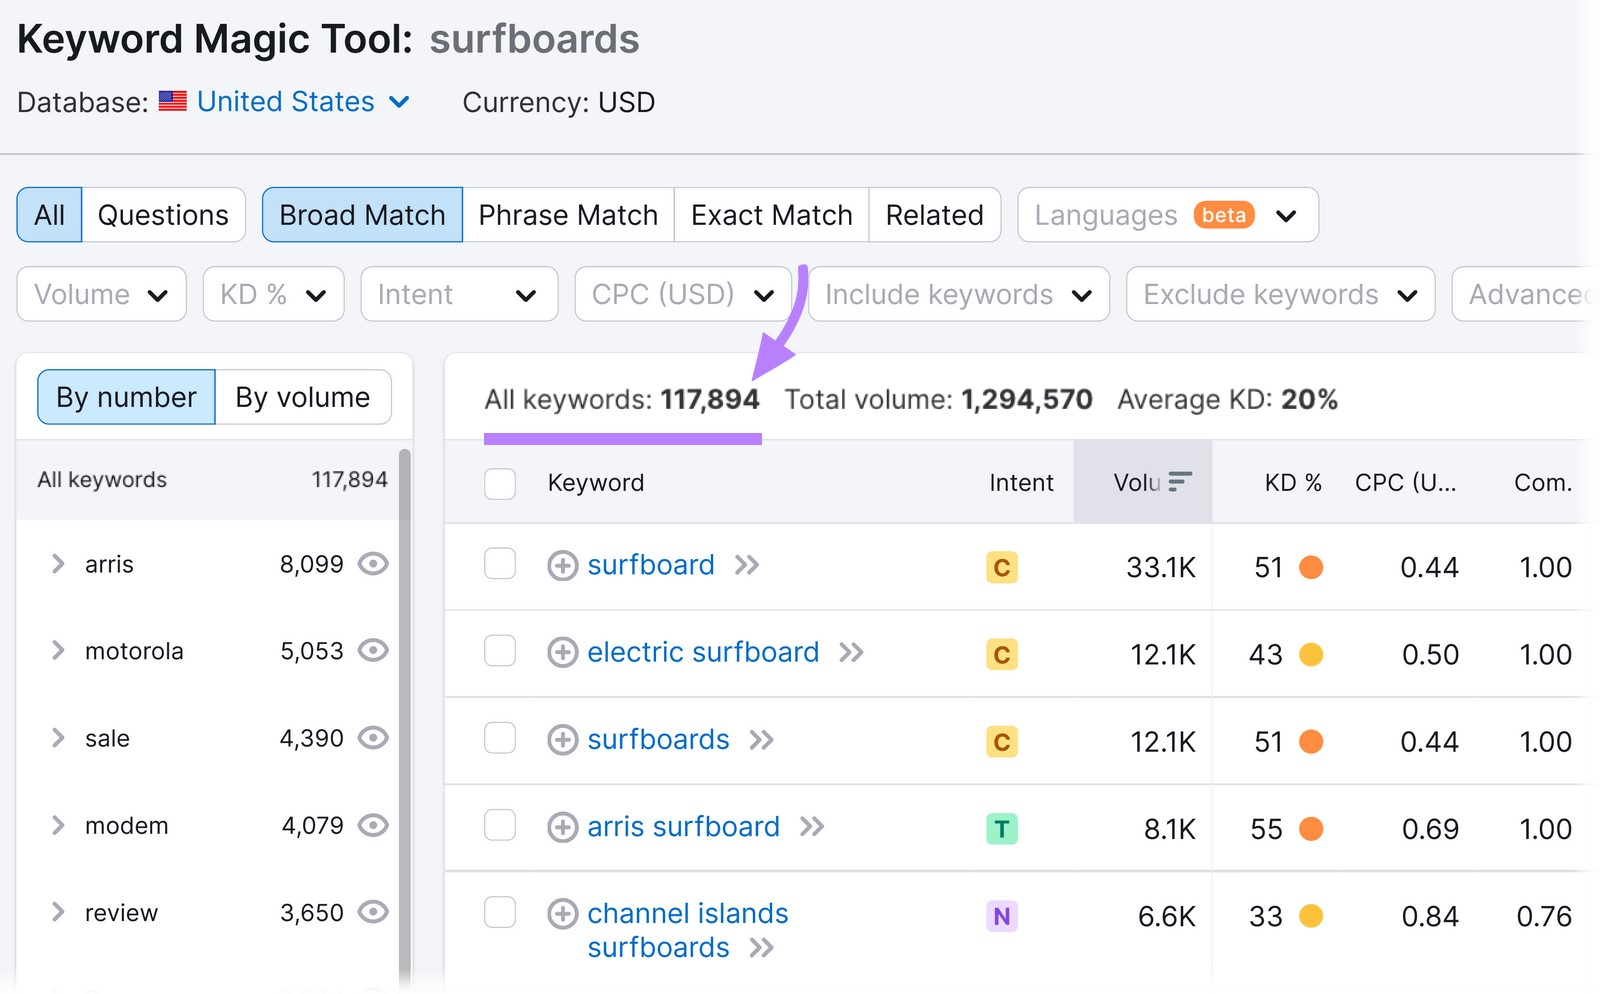 Keyword Magic Tool shows about 117k keywords related to "surfboards"